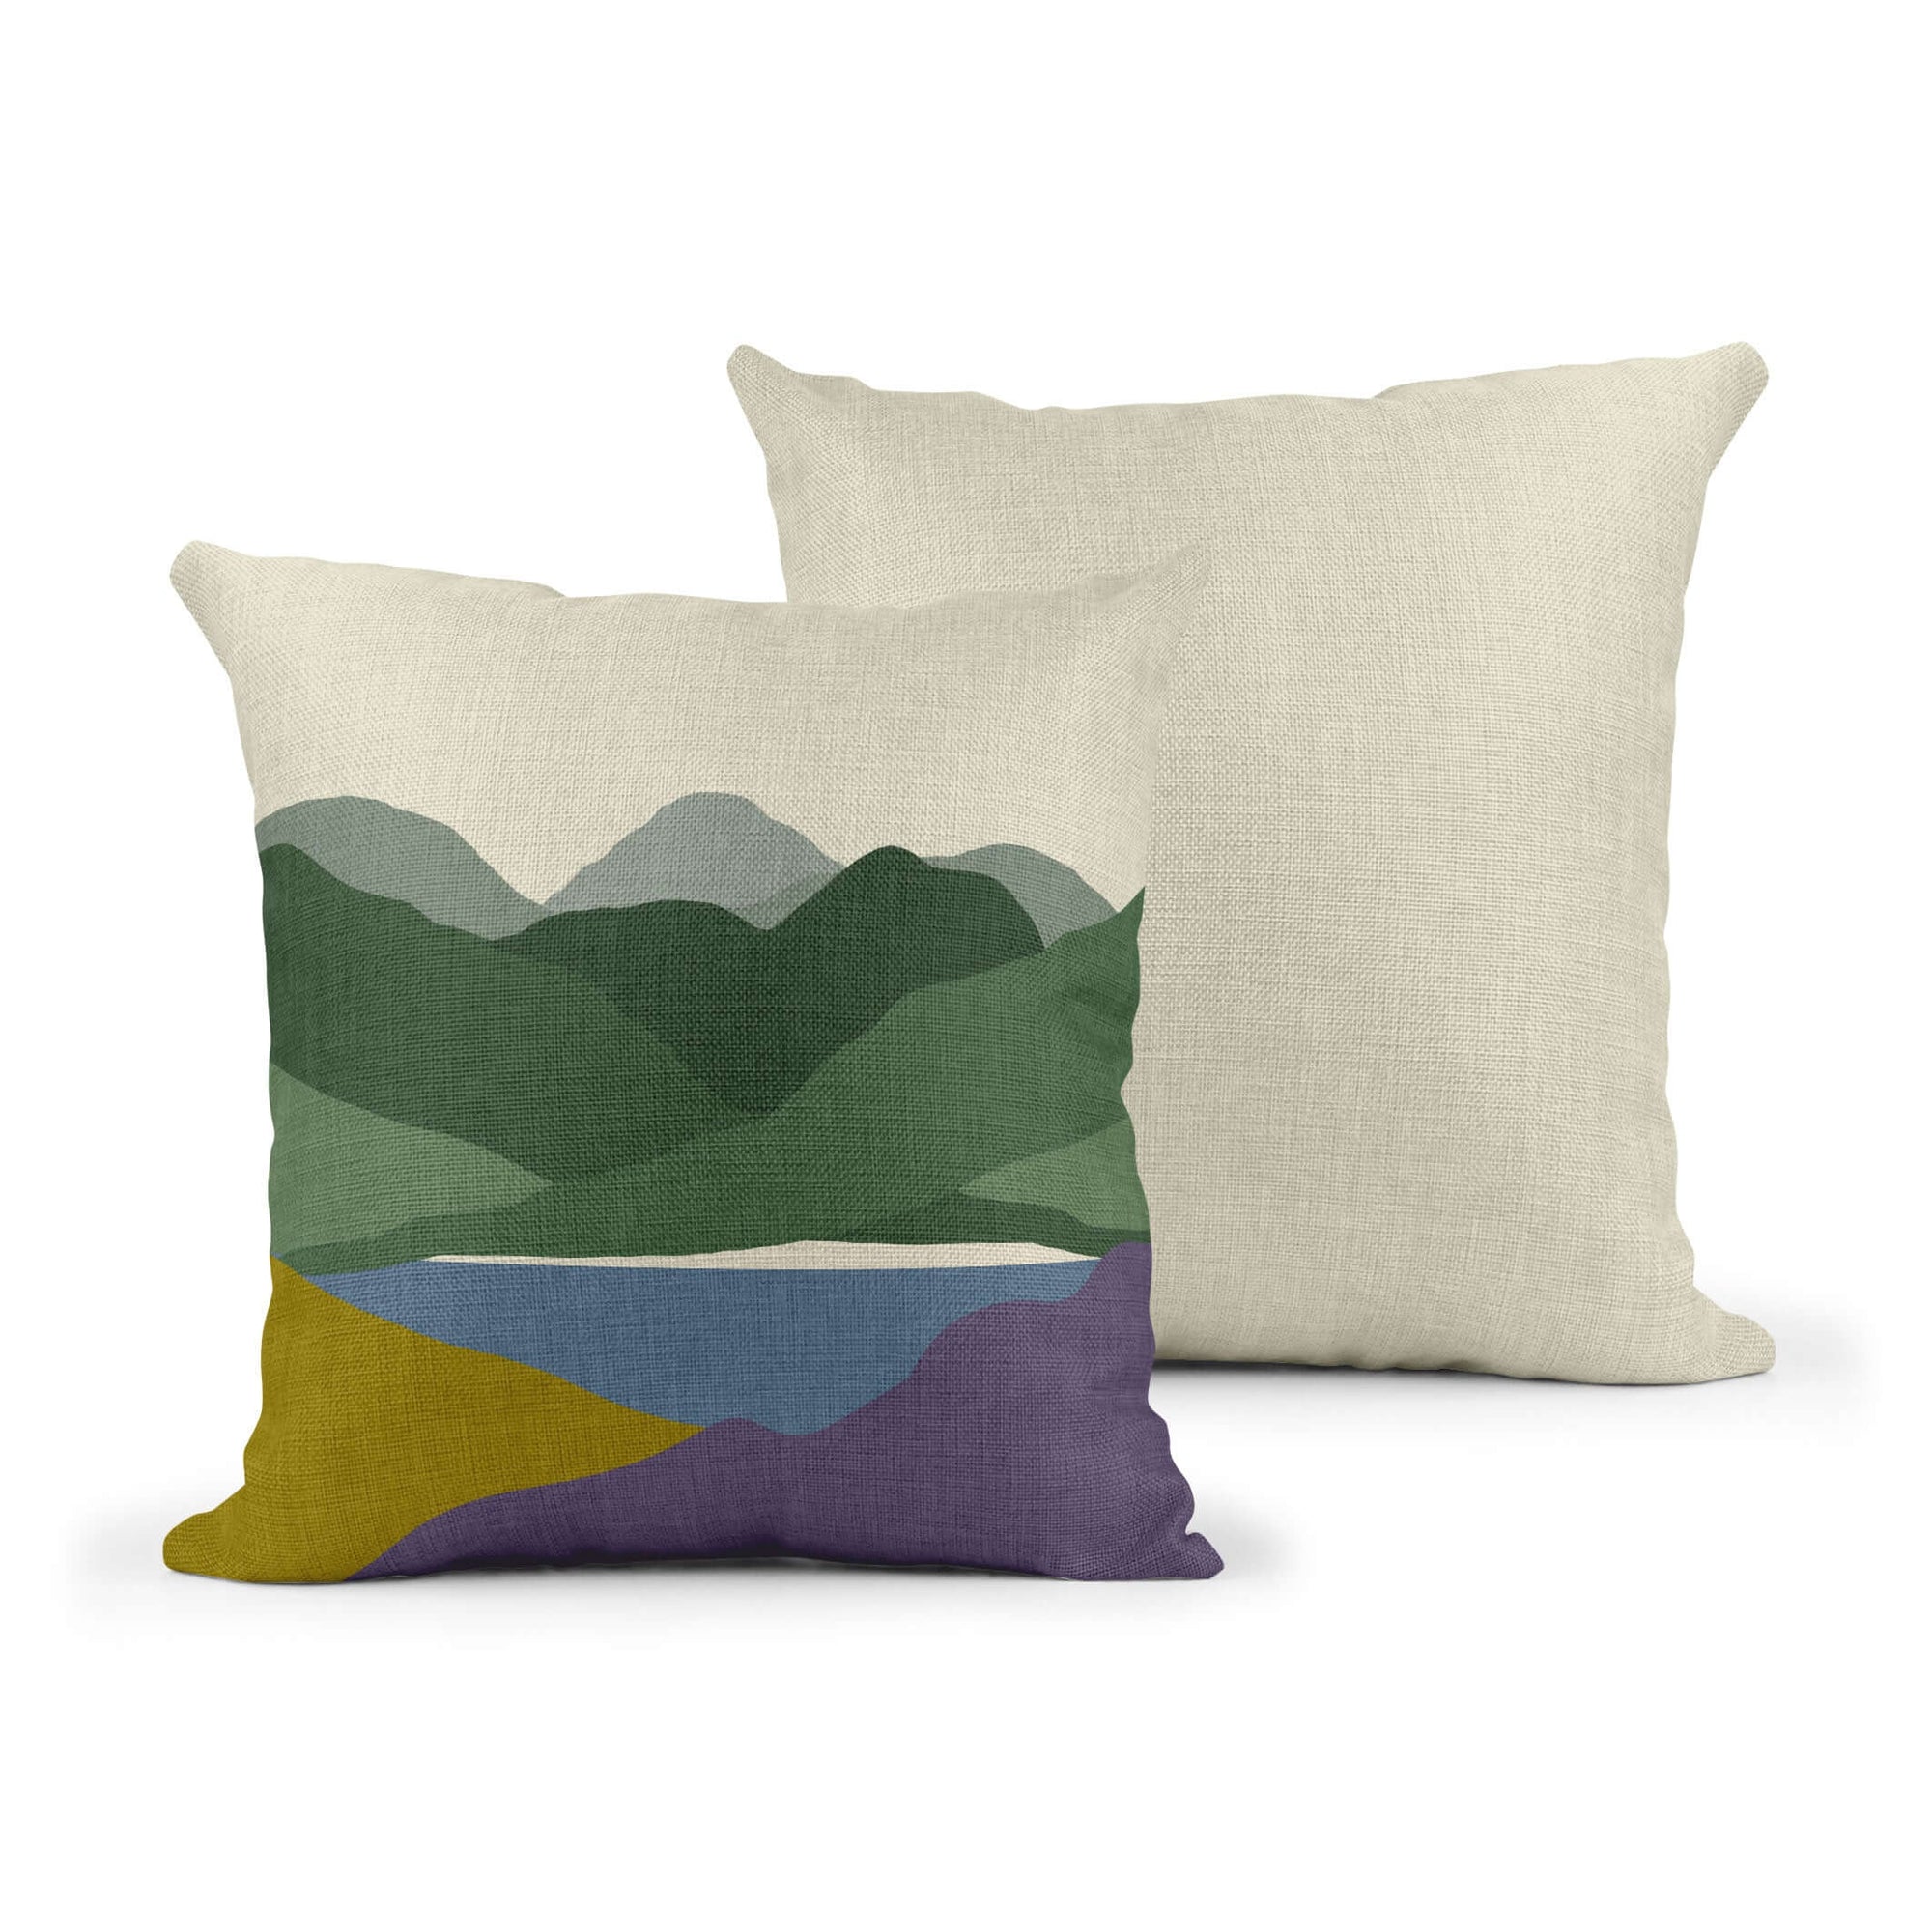 Welsh Hills Heather and Gorse Cushion